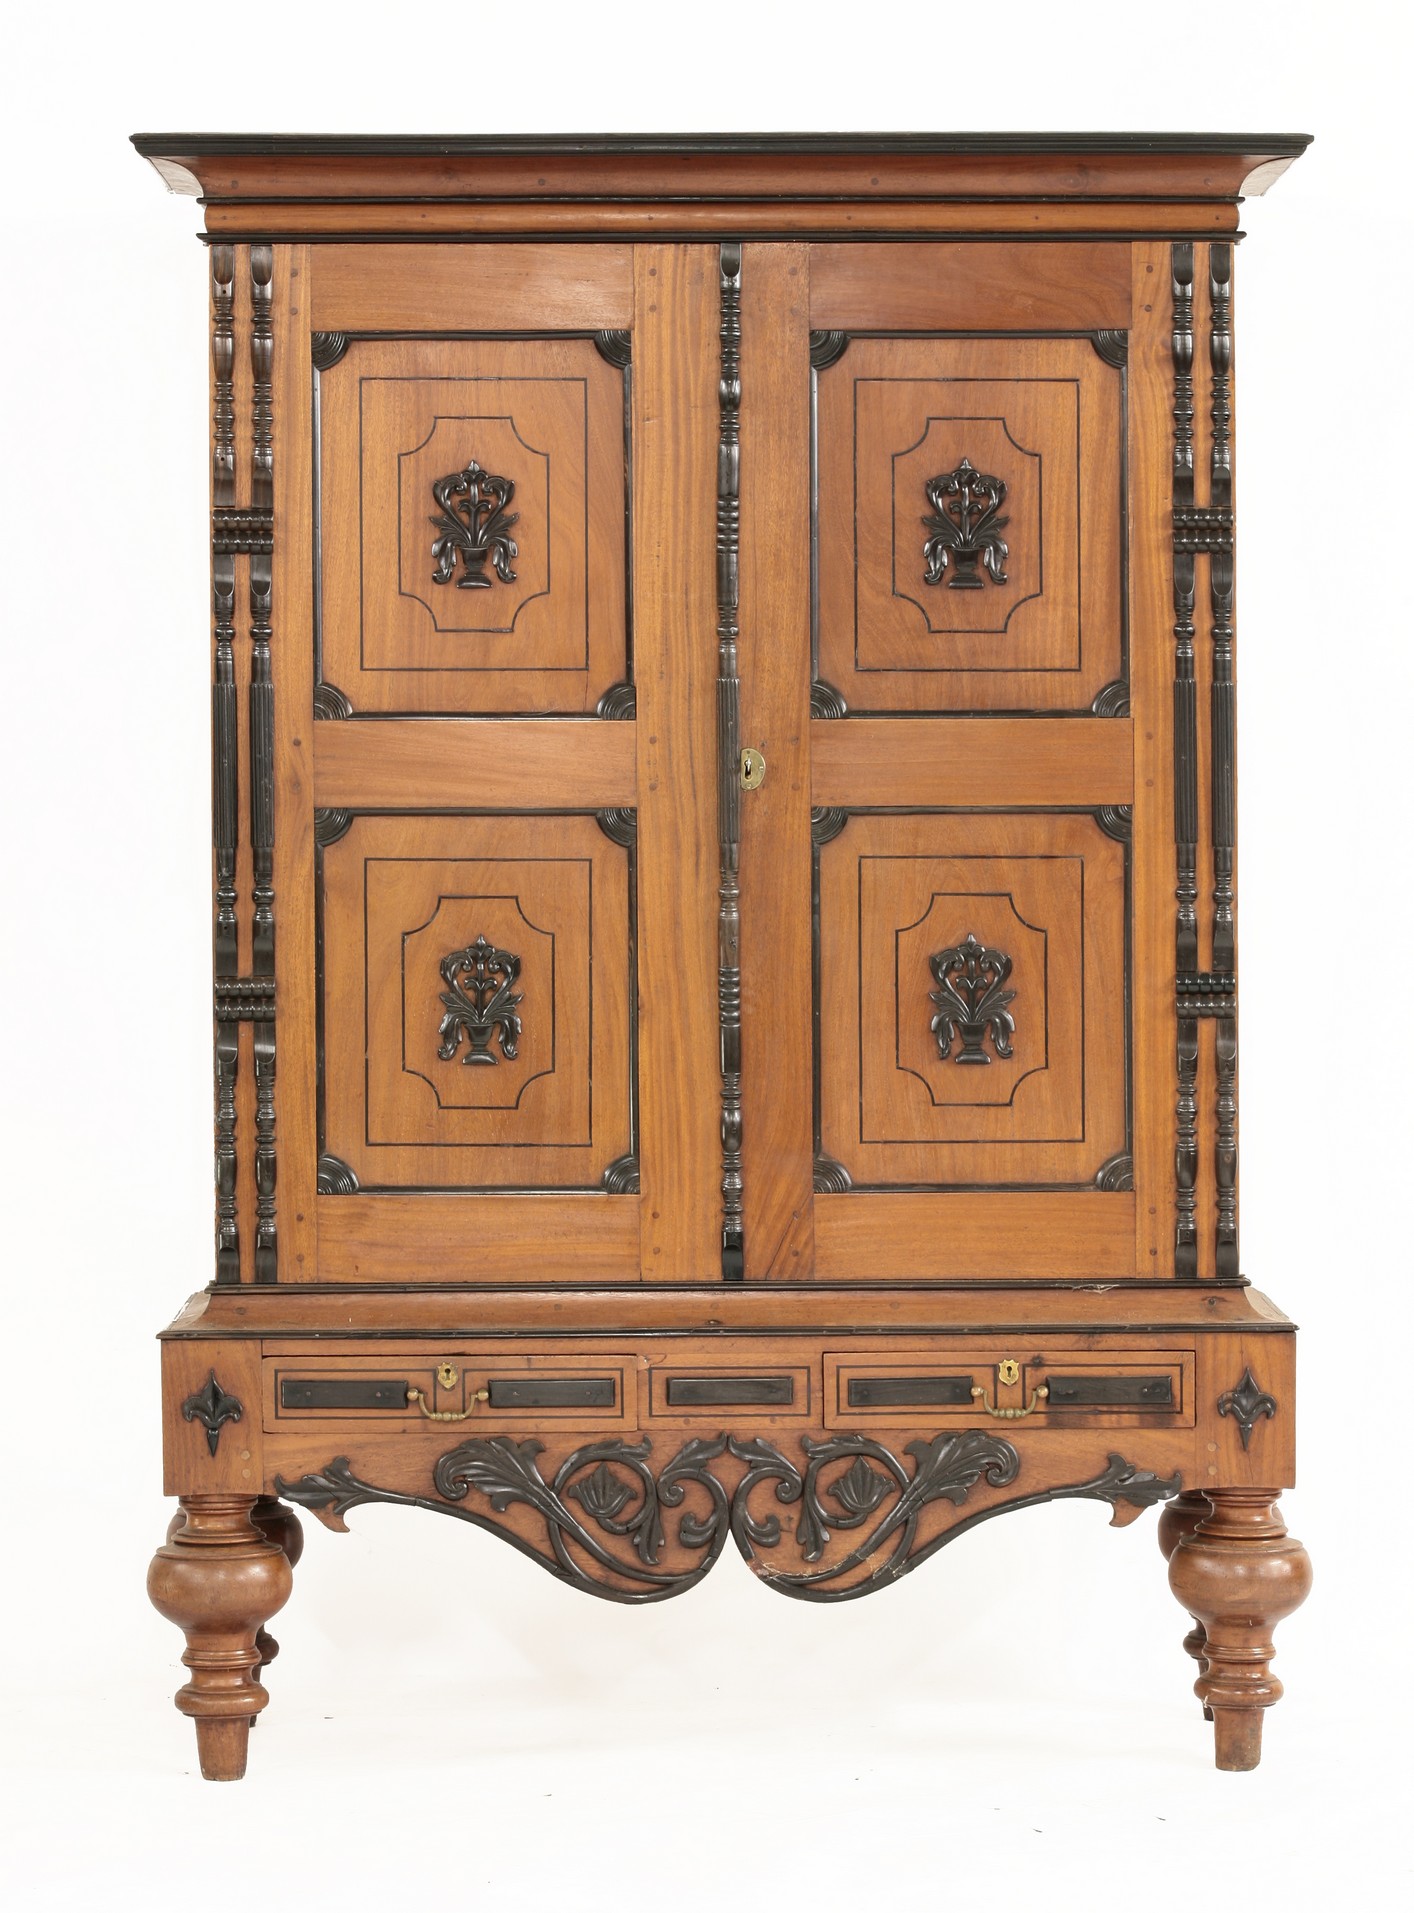 A Sri Lanka hardwood livery cupboard,
mid 19th century, with ebonised stringing and applied